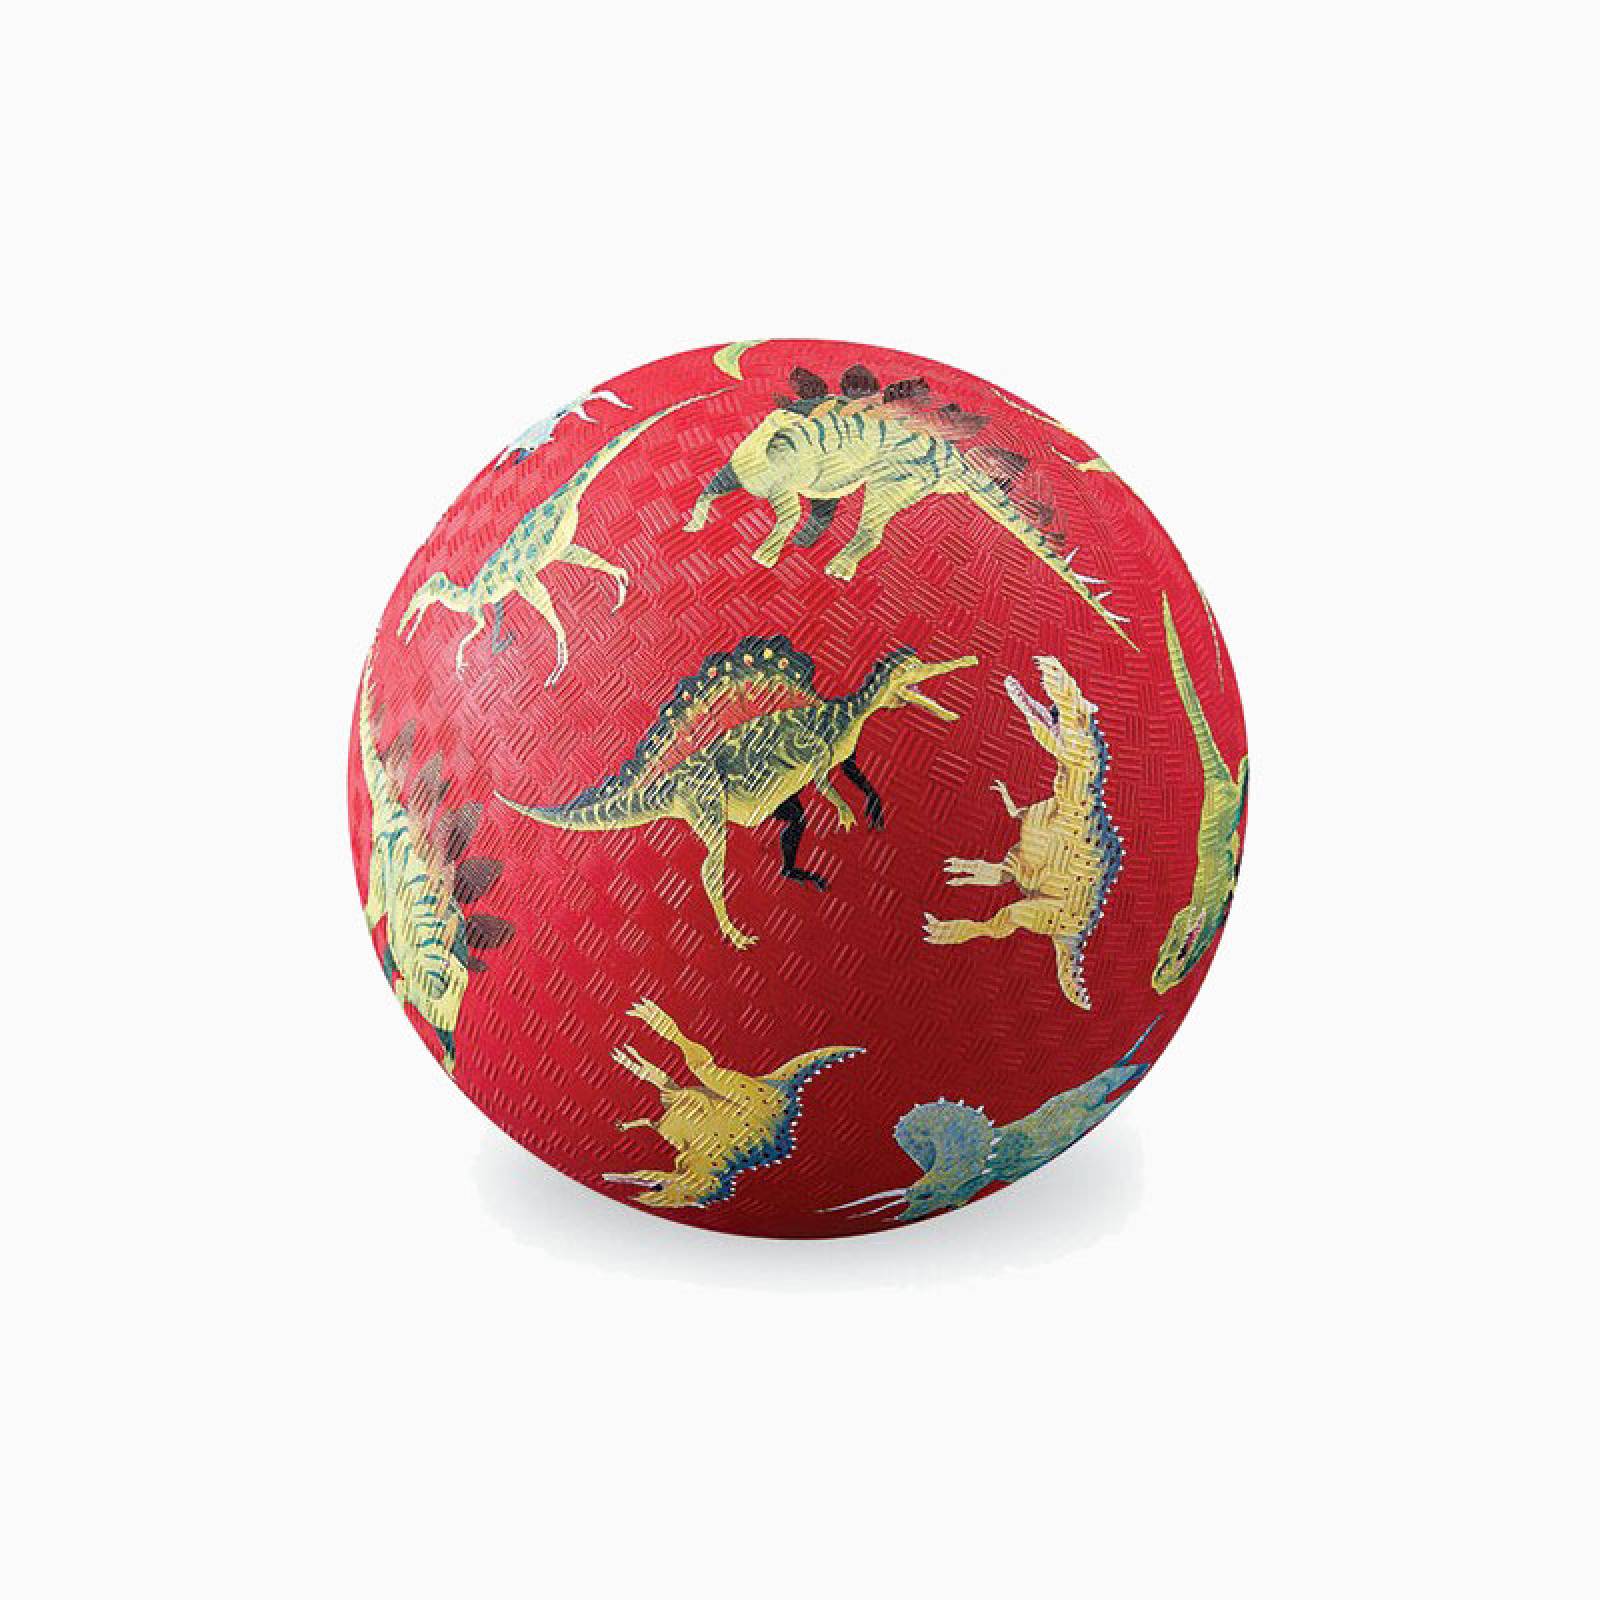 Red Dinosaur - Small Rubber Picture Ball 13cm